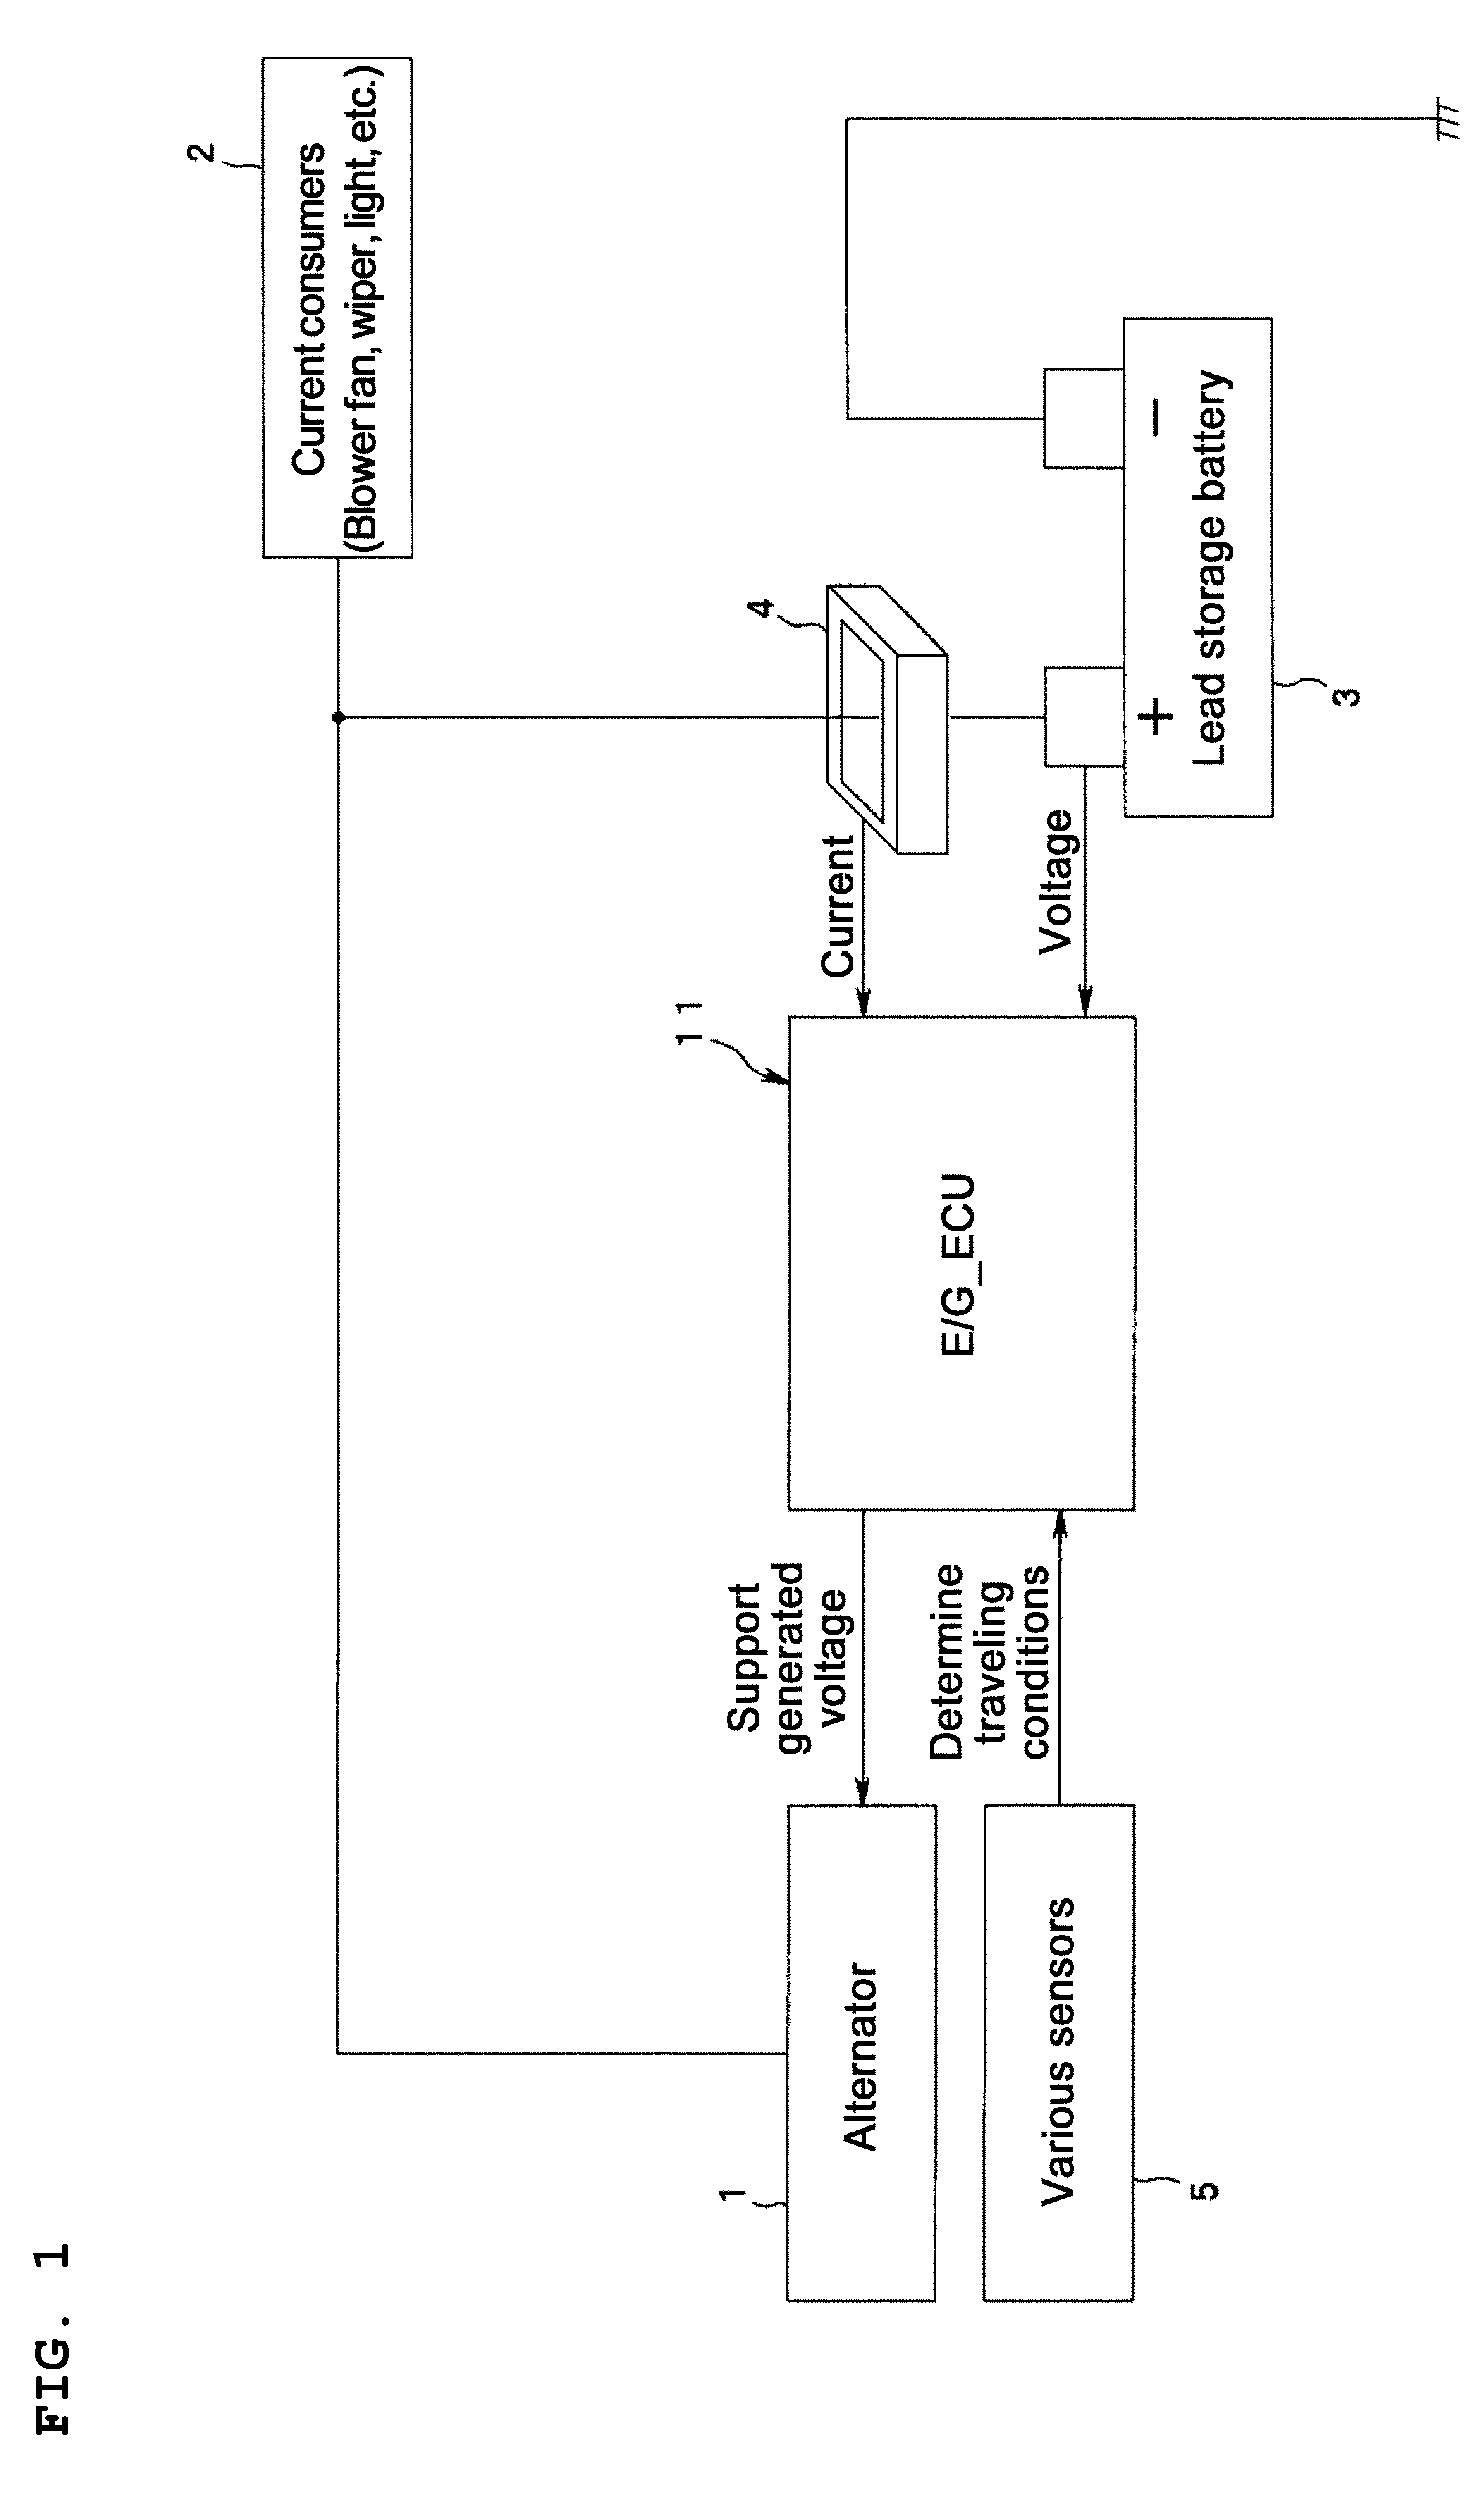 Charging control device for a storage battery